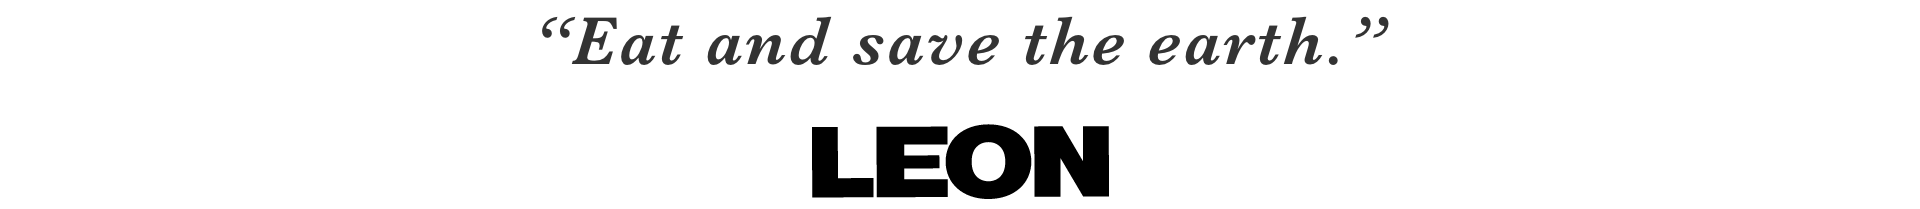 “Eat and save the earth.” LEON